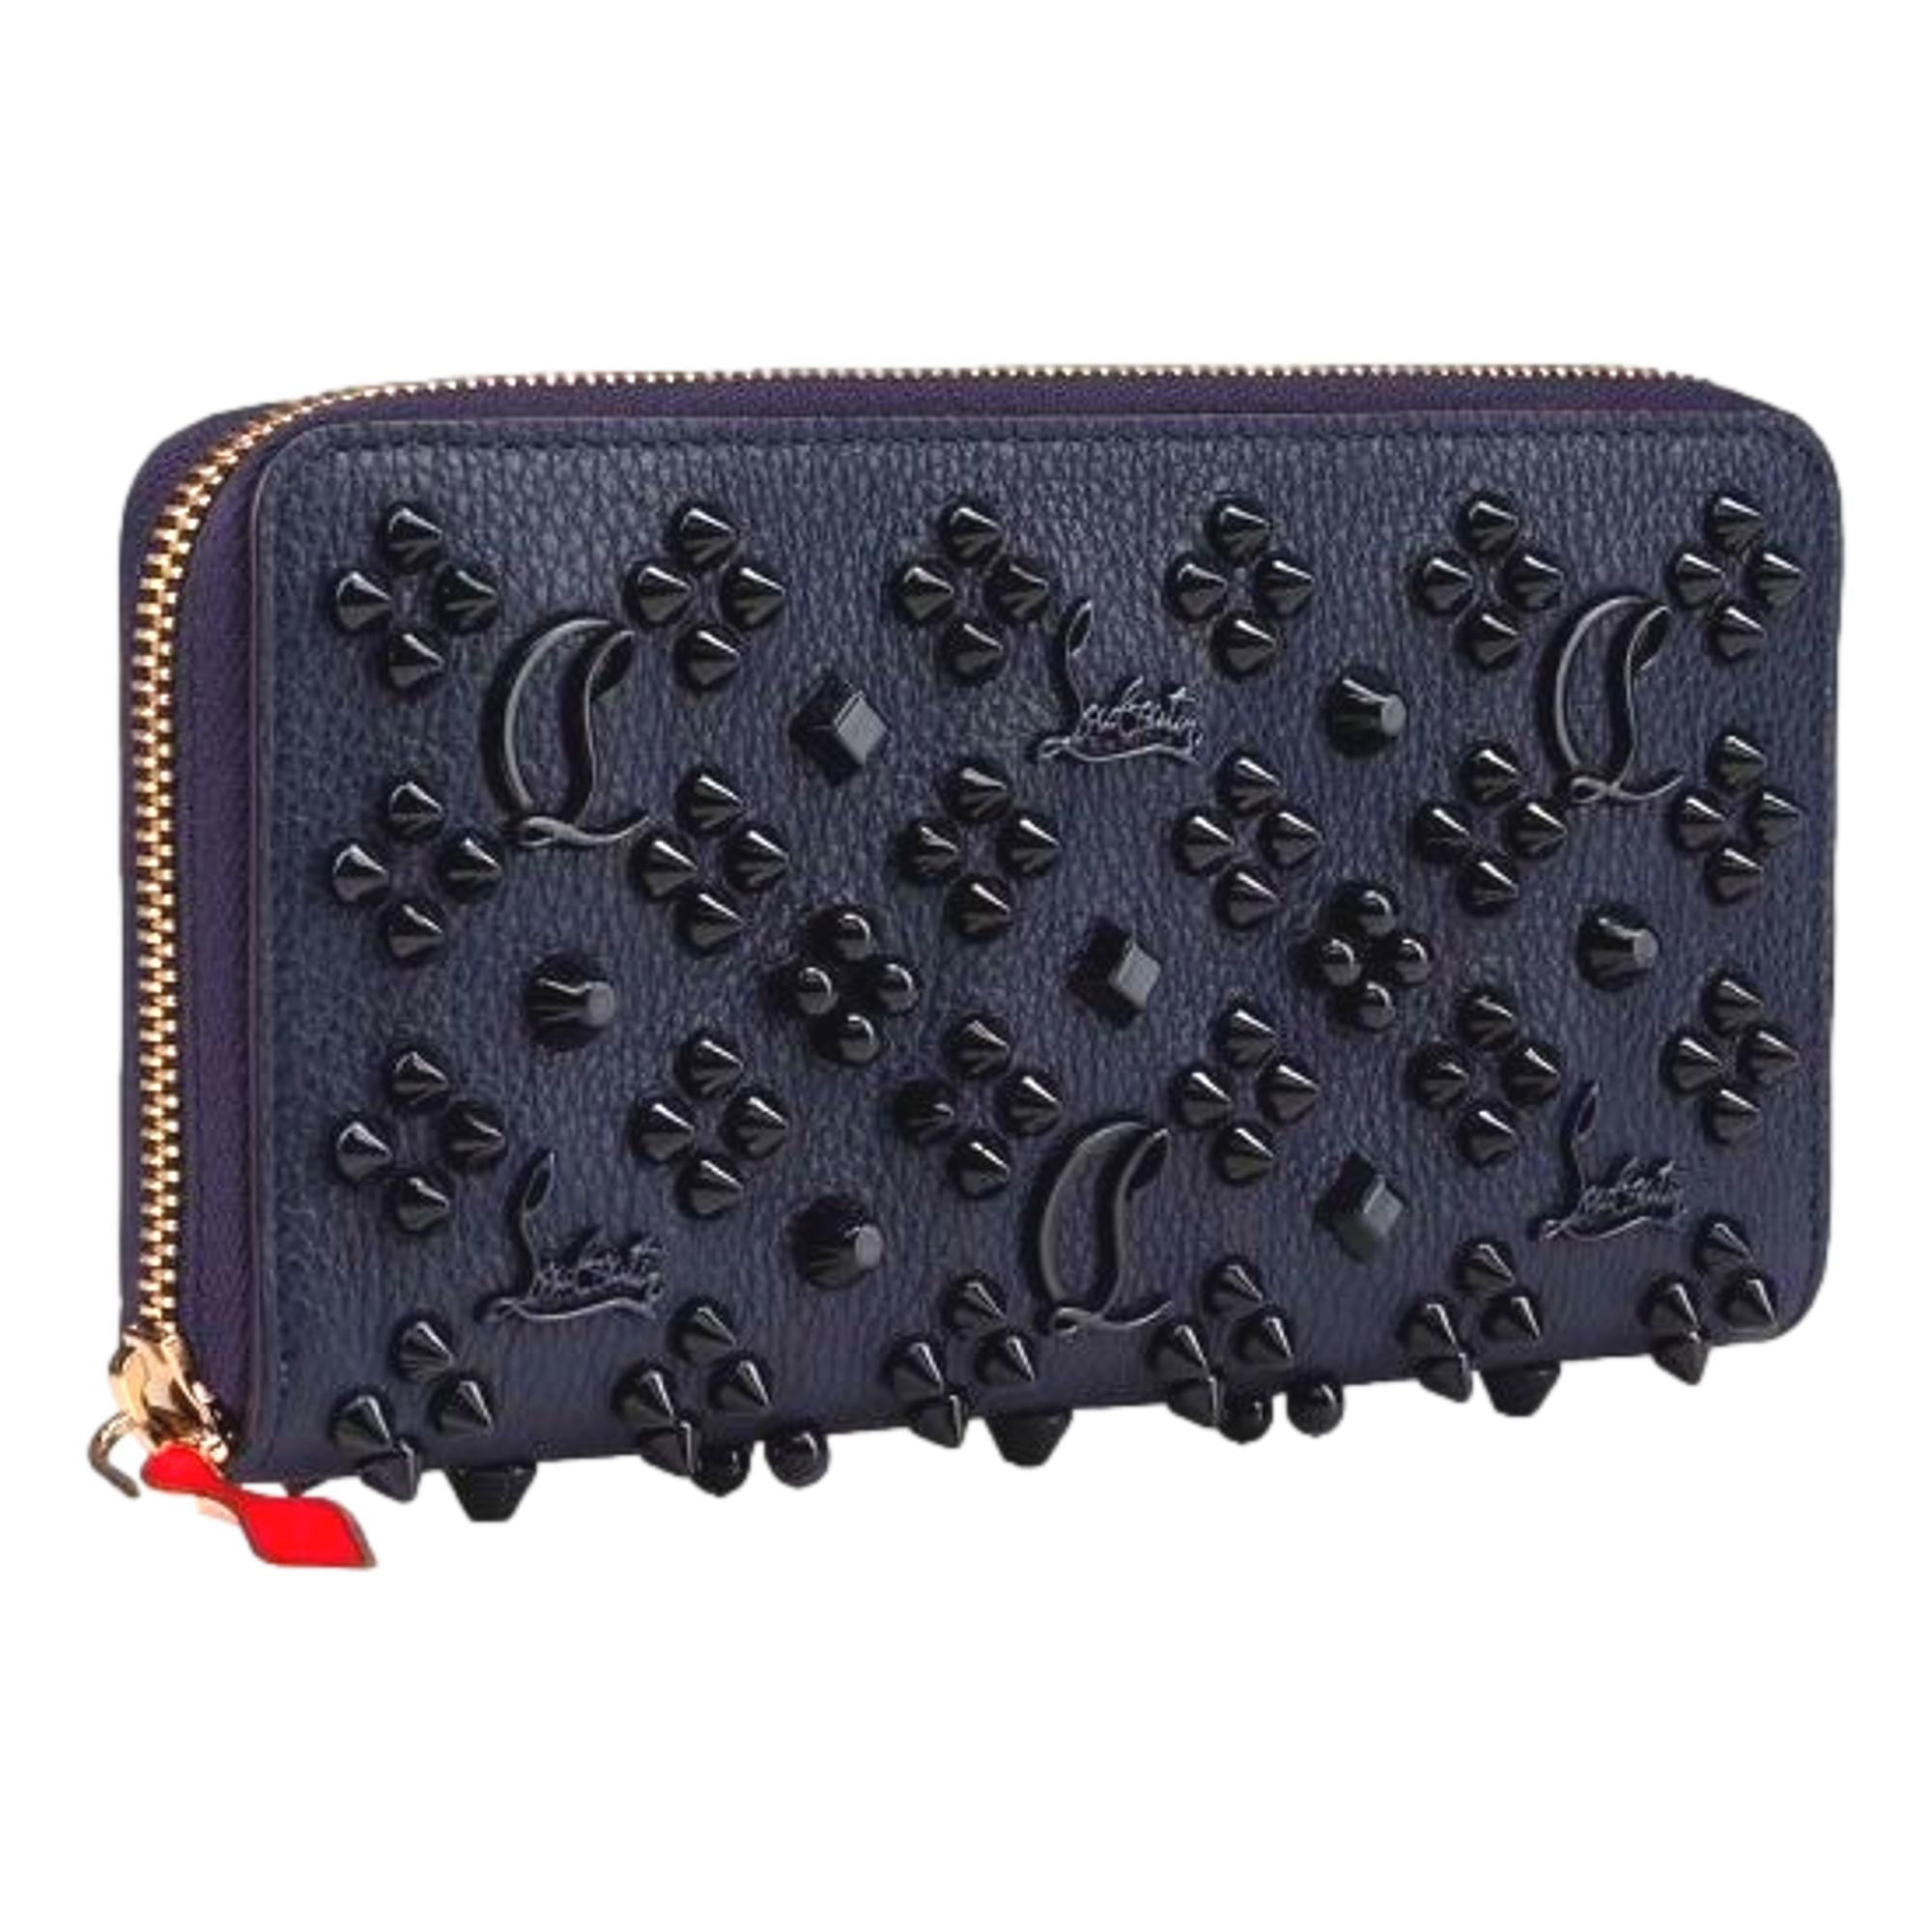 Christian Louboutin Panettone Studded Blue Leather Zip Around Wallet 3175224